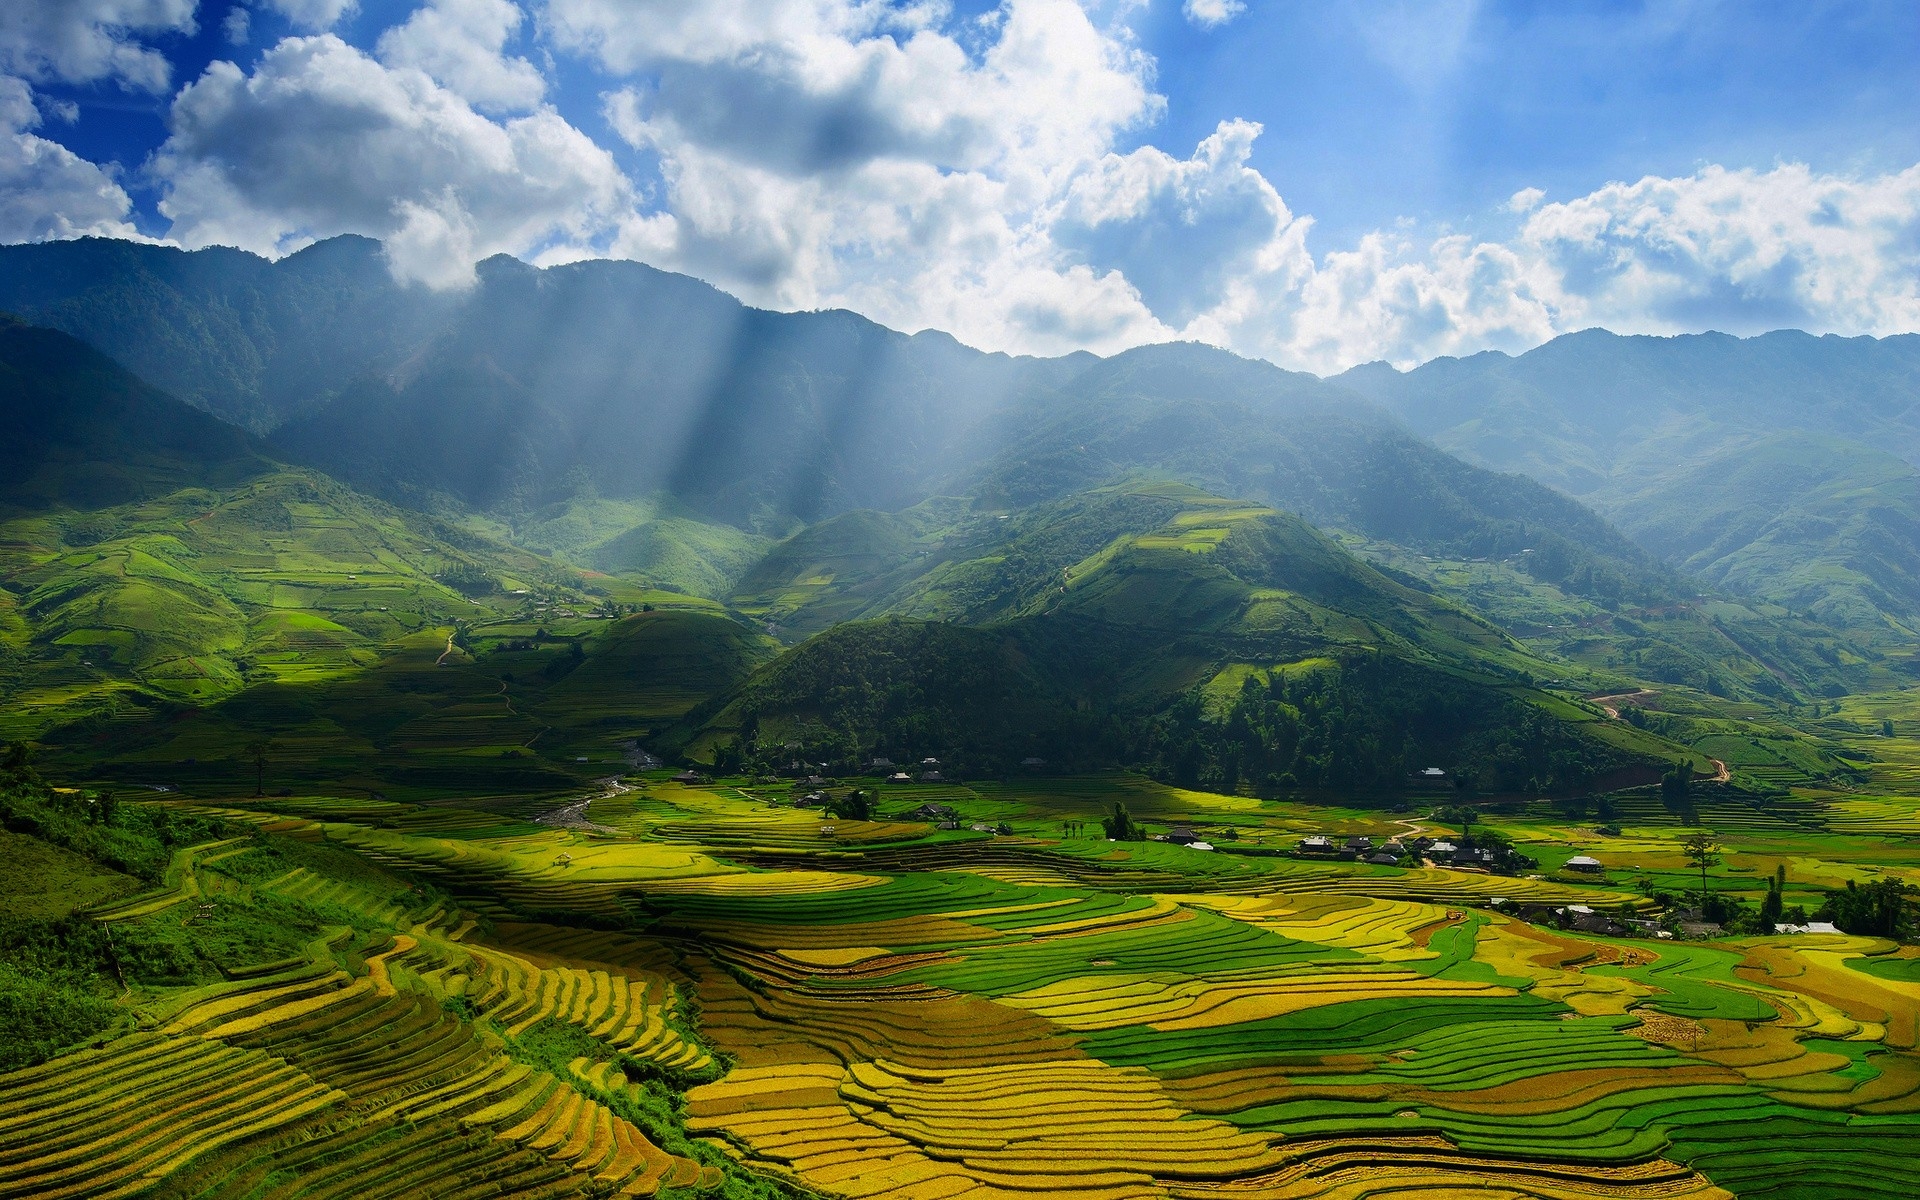 Mu Cang Chai (Yen Bai Province) strives to quickly become a tourist district